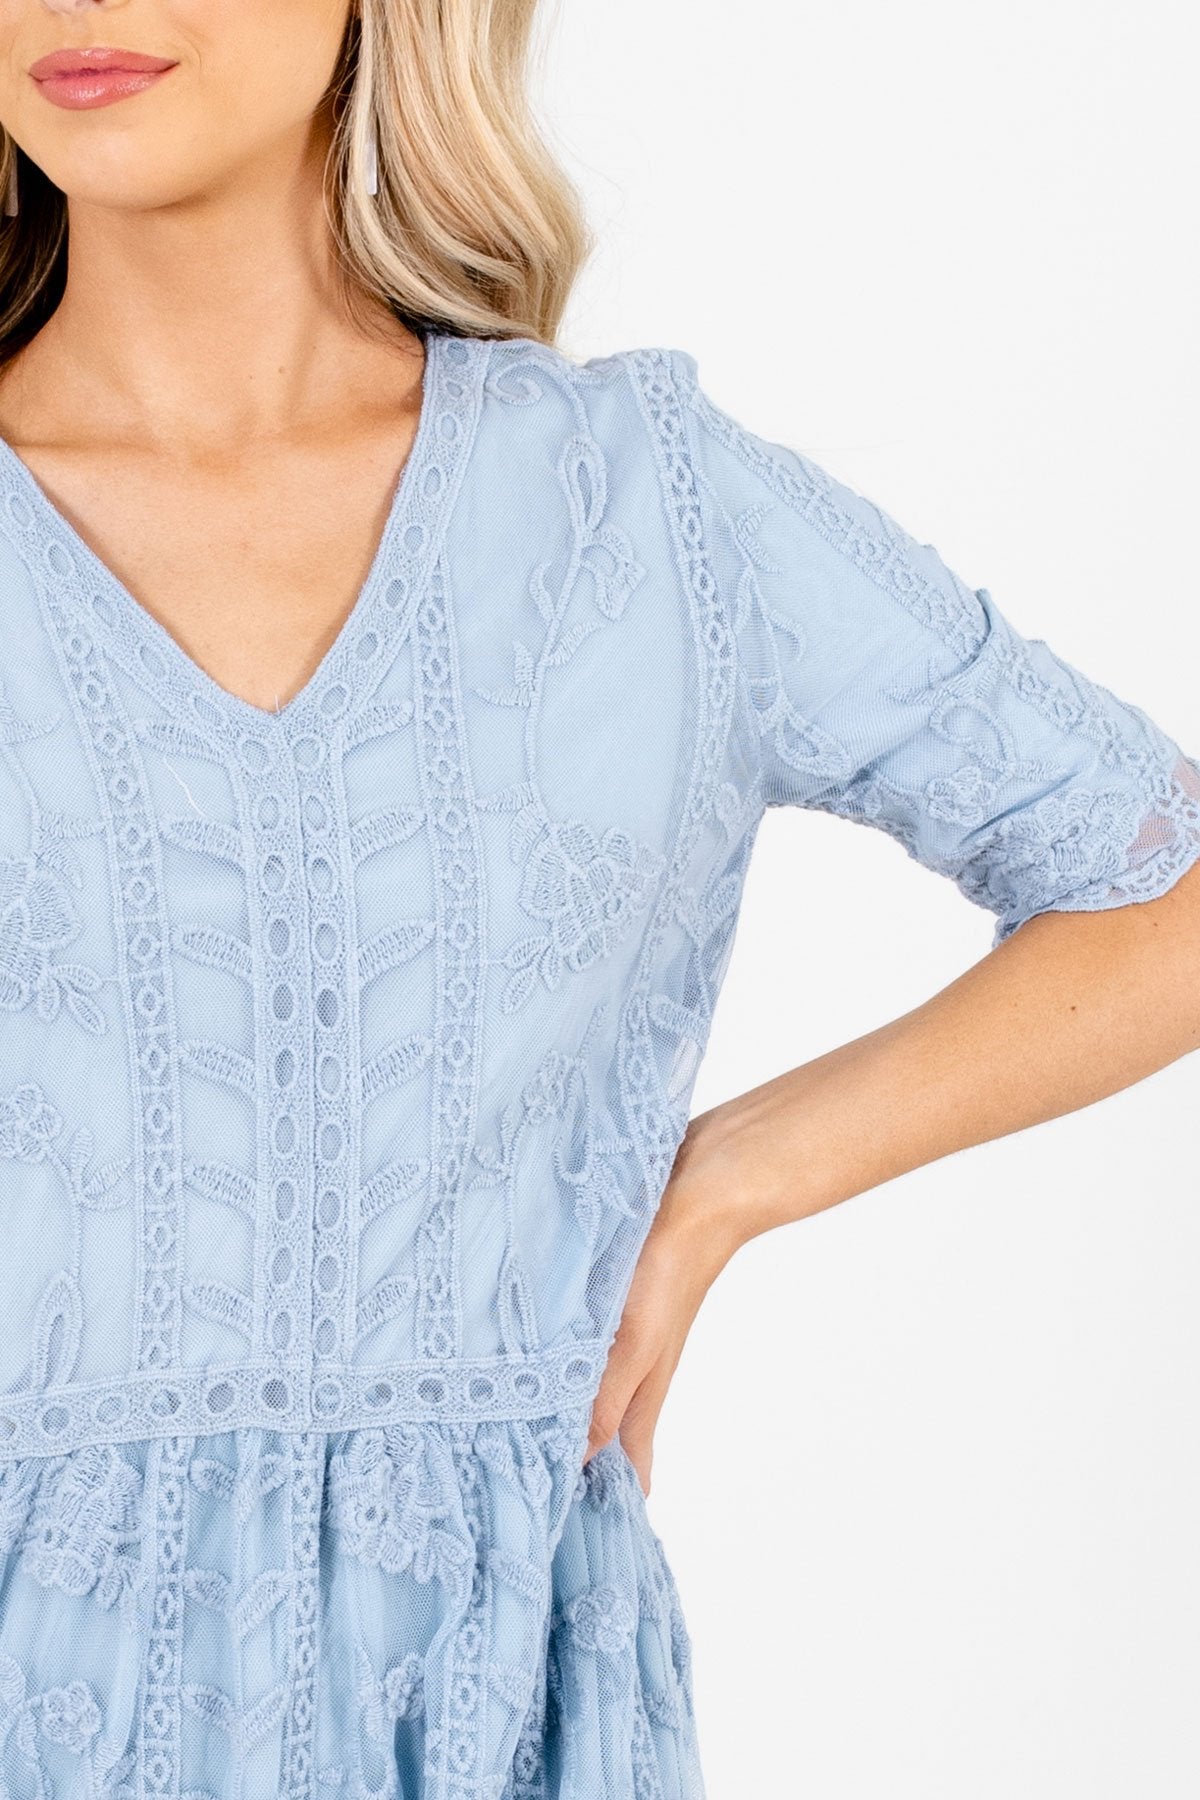 Blue Affordable Online Boutique Clothing for Women 